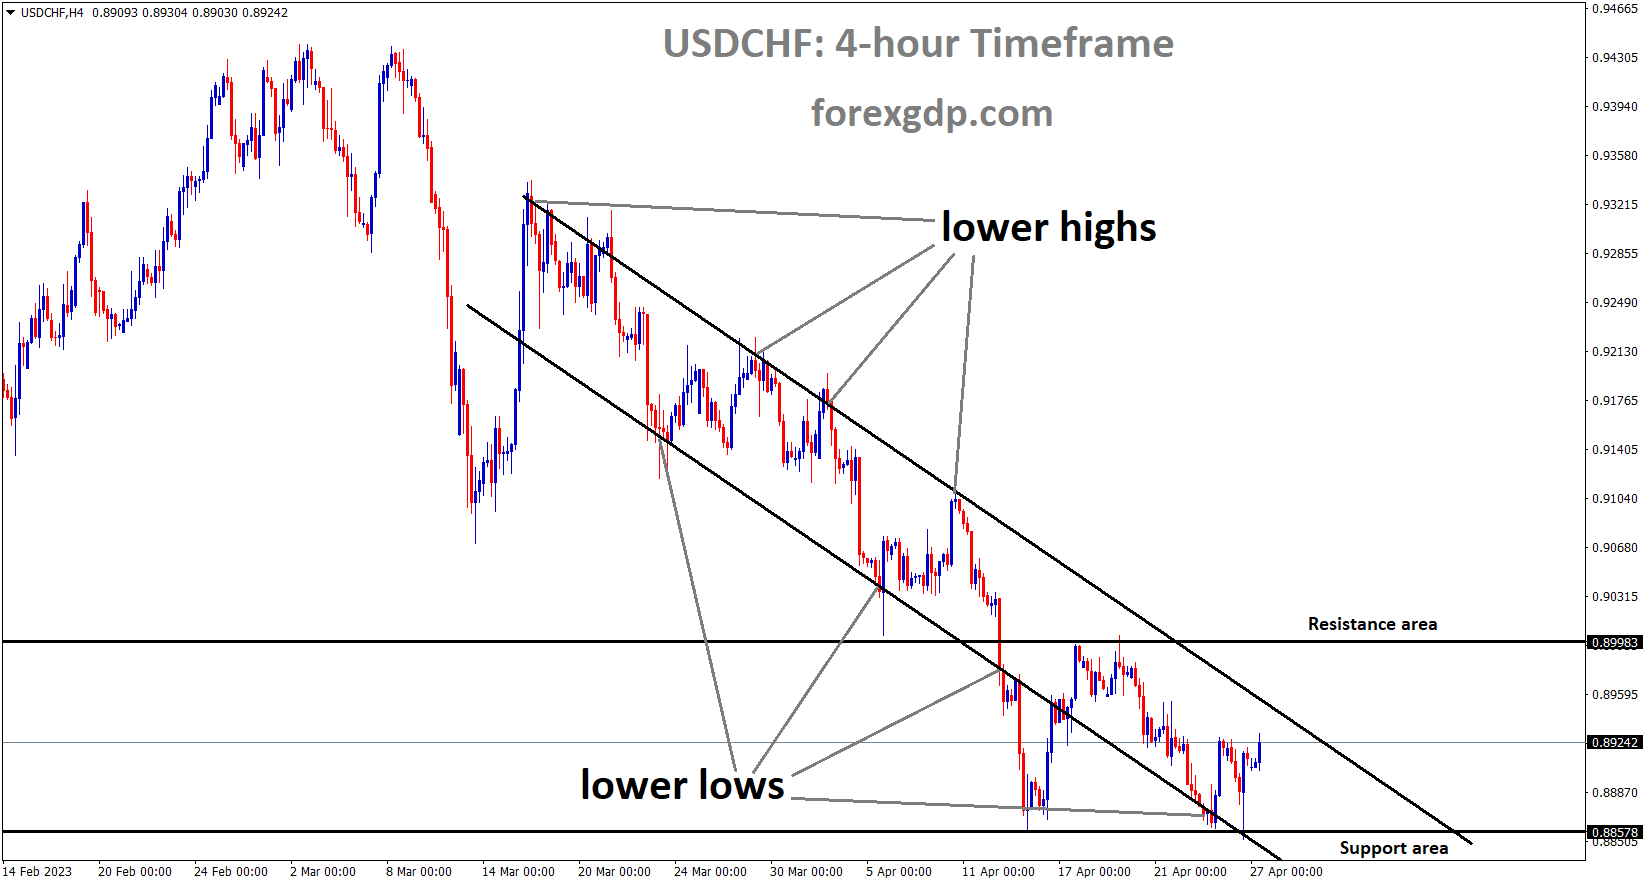 USDCHF is moving in the Descending channel and the market has rebounded from the lower low area of the channel 1